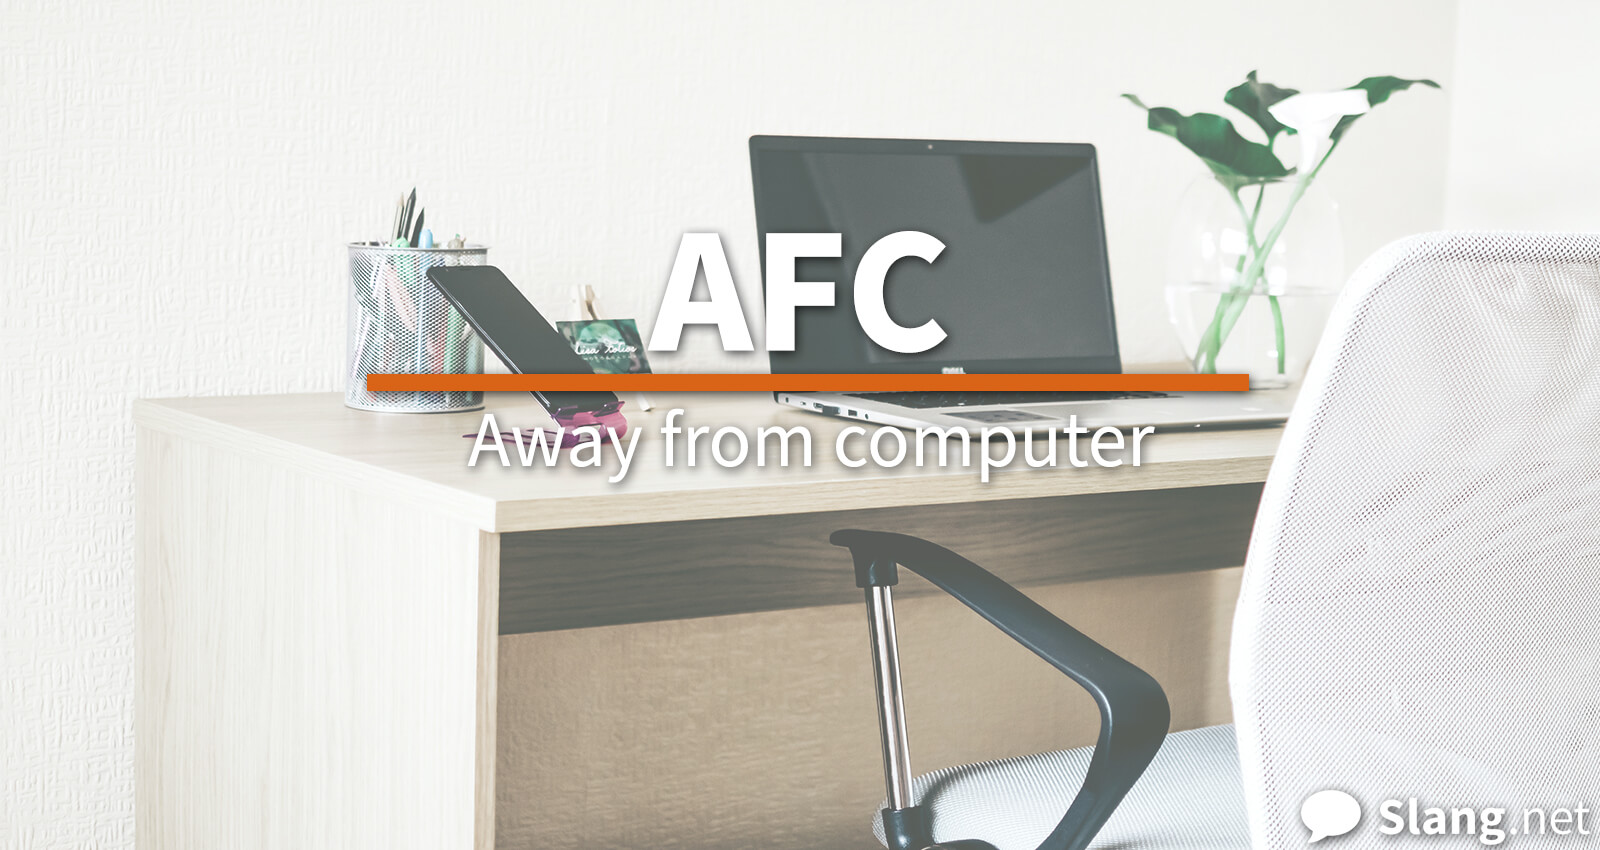 AFC can stand for &quot;away from computer&quot;